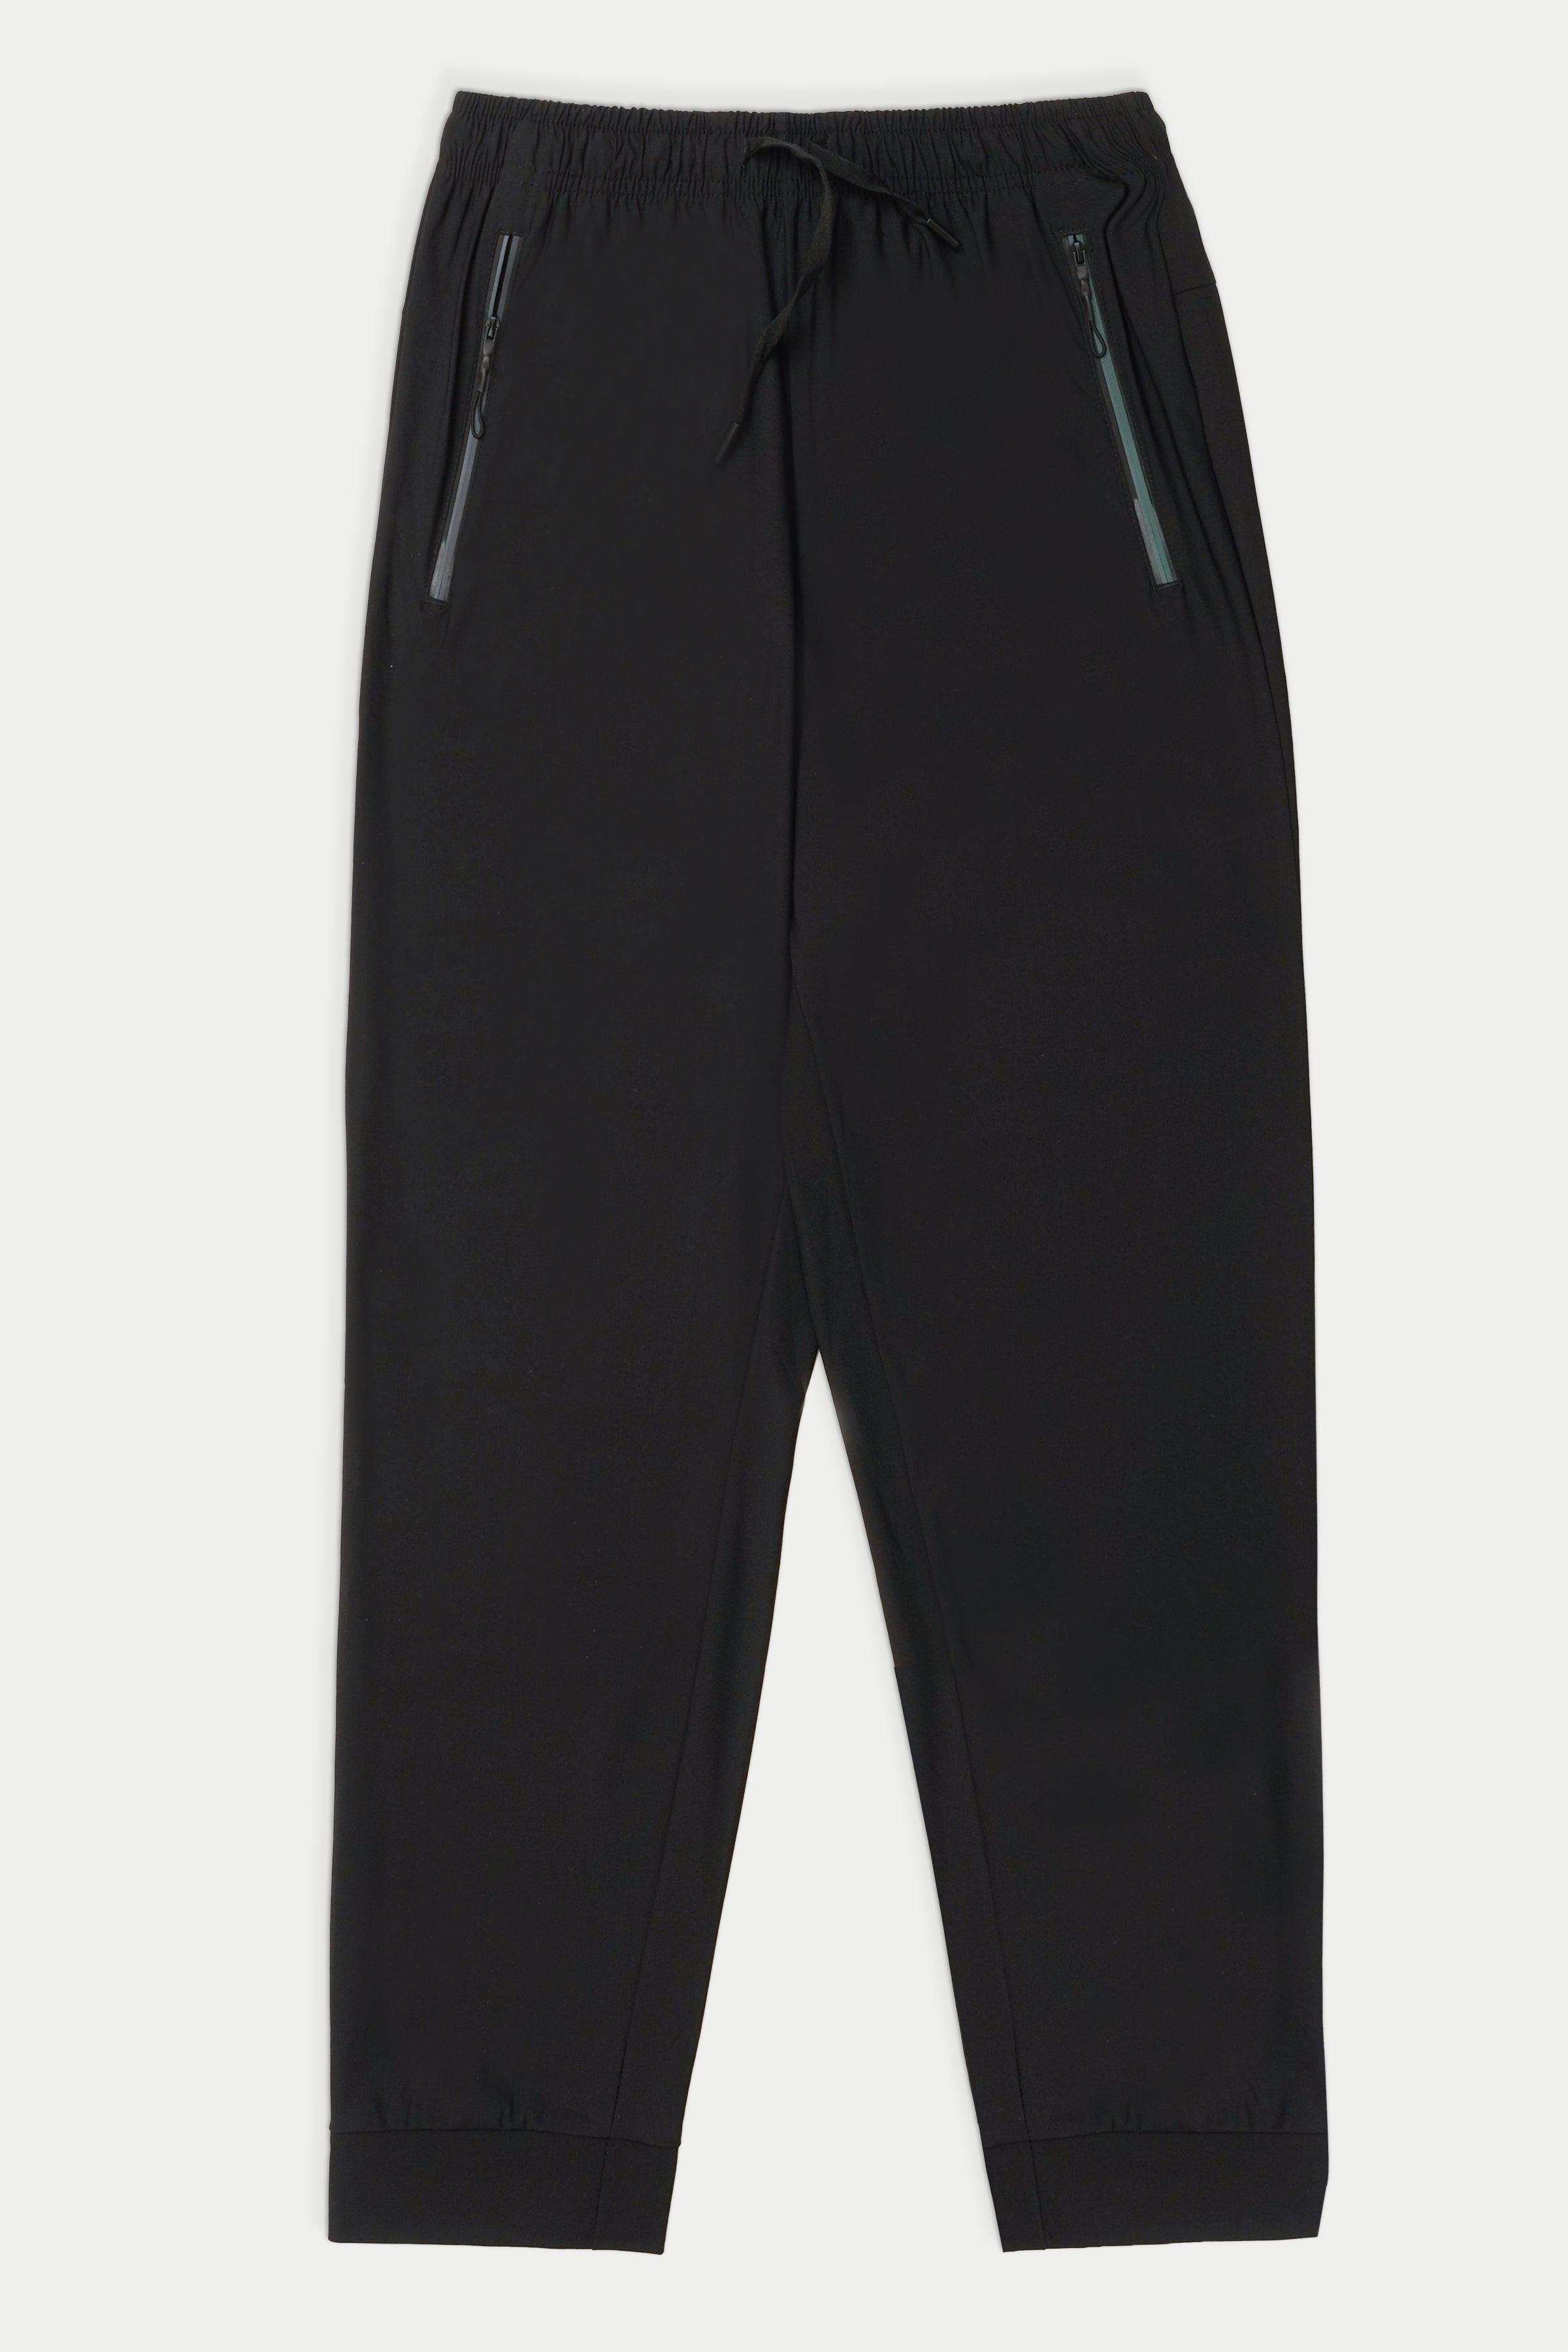 SPORTS TROUSER BLACK at Charcoal Clothing